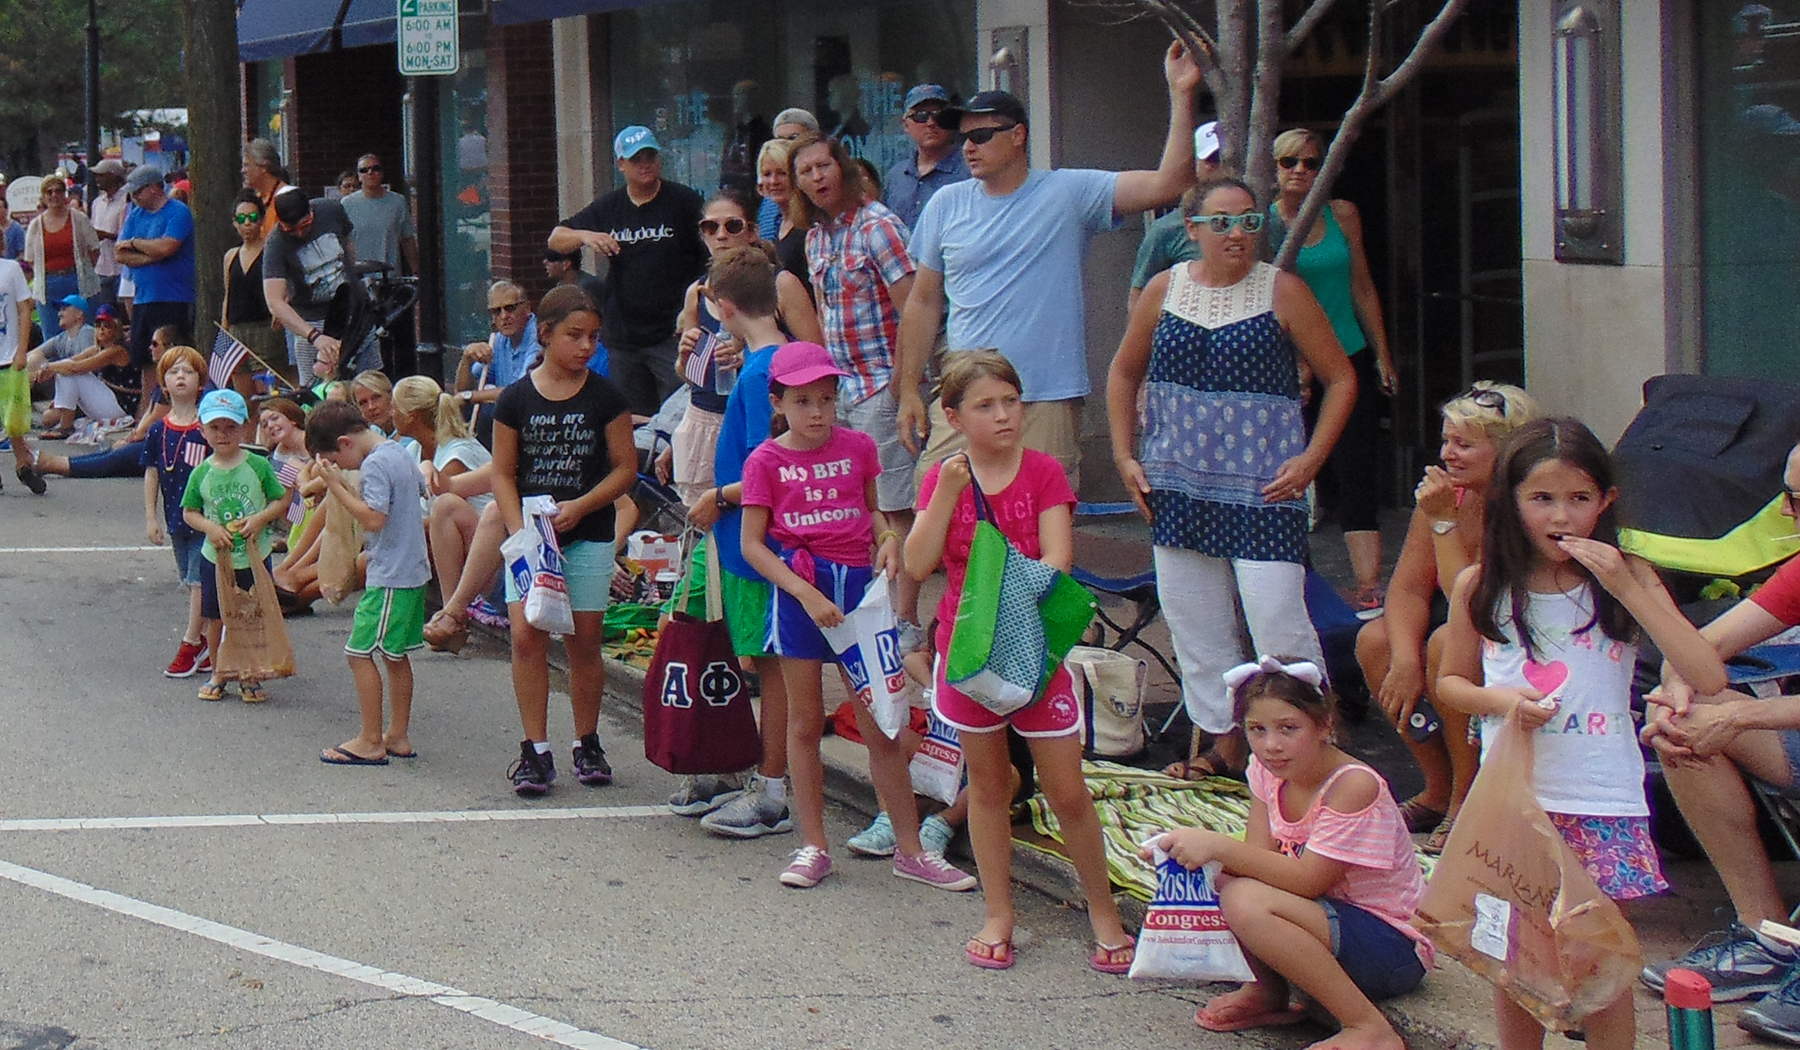 Naperville celebrates Labor Day with parade Chronicle Media